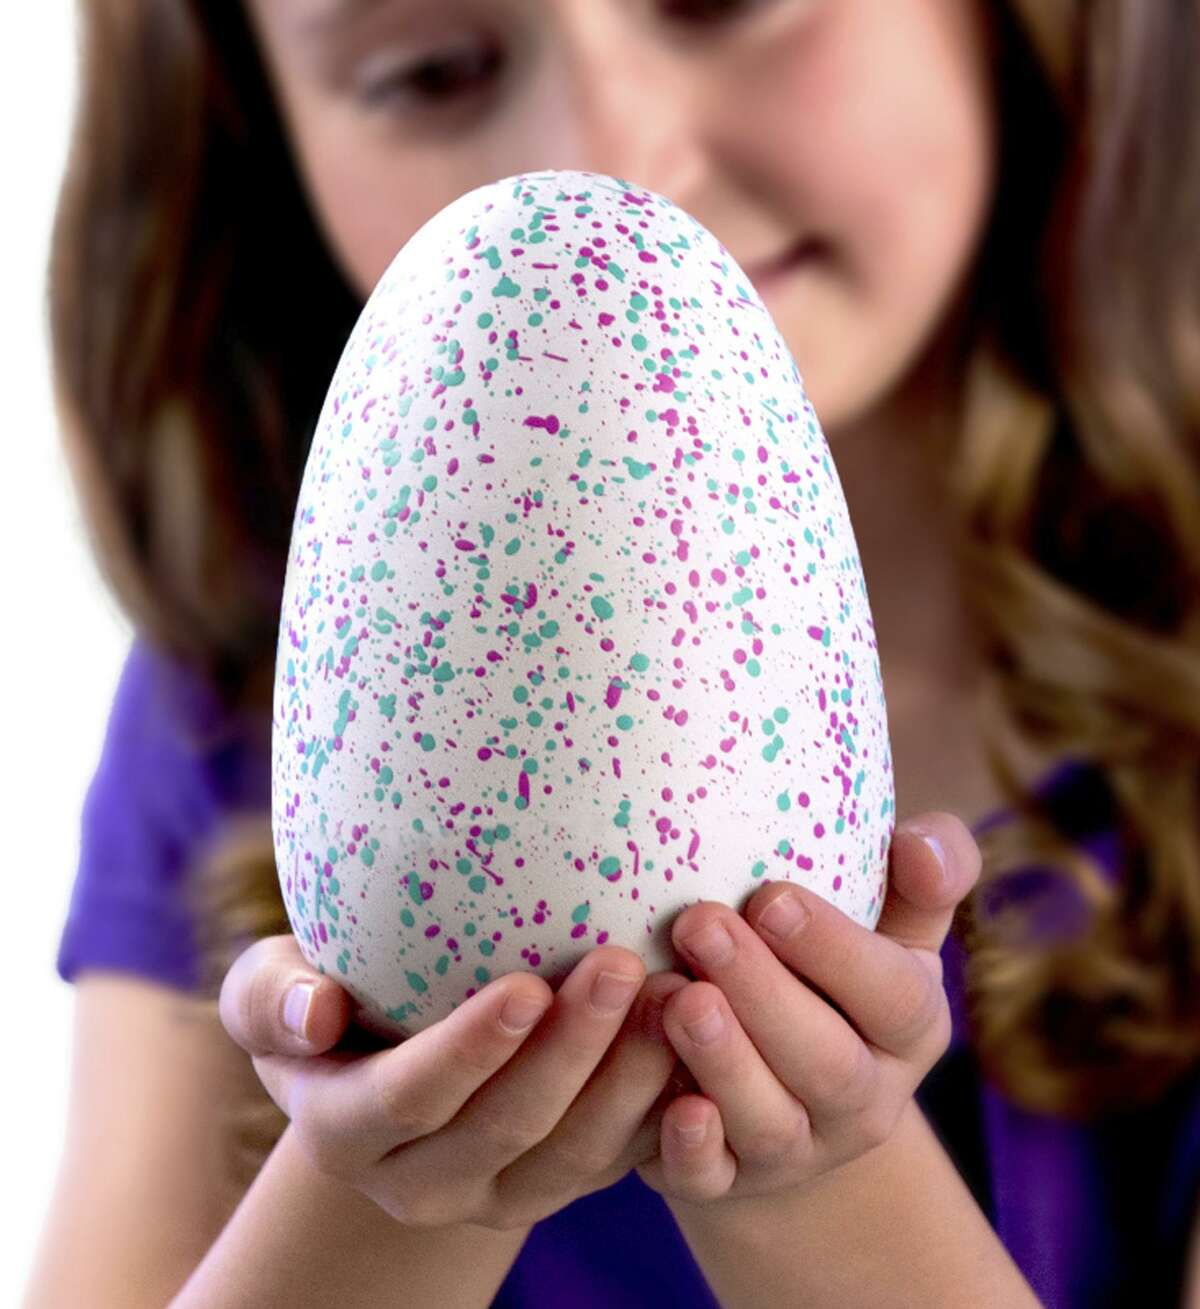 Retailers have struggled to keep the popular Hatchimal toy on their shelves, citing high customer demand and touch-and-go supply from manufacturers. H-E-B spokeswoman Dya Campos said the San Antonio-based supermarket chain’s Plus stores are expected to receive shipments Monday or Tuesday.